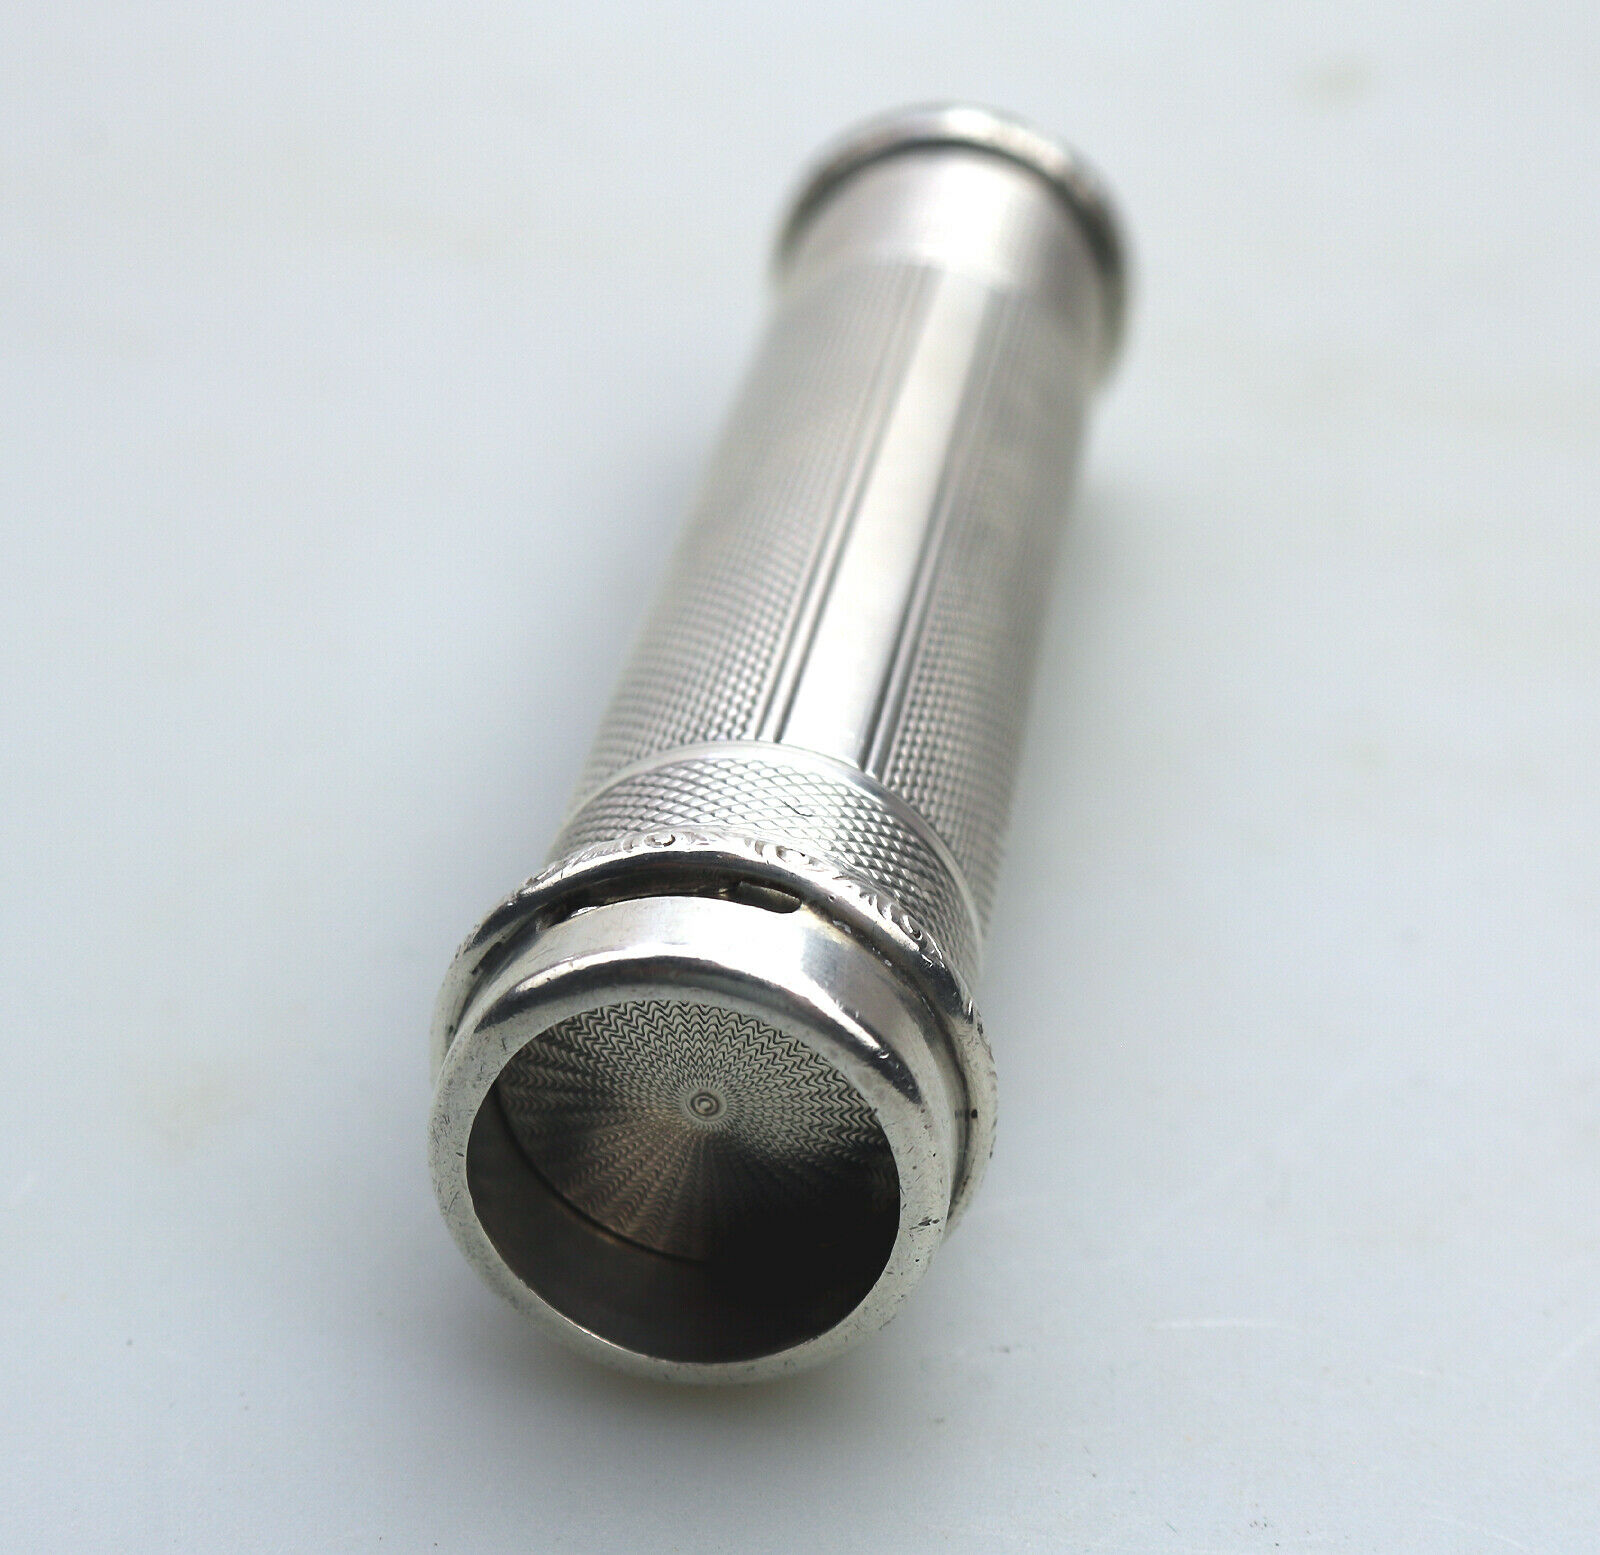 A WWII Era Blitz / Doctors solid silver Torch C.1940 - Image 4 of 5